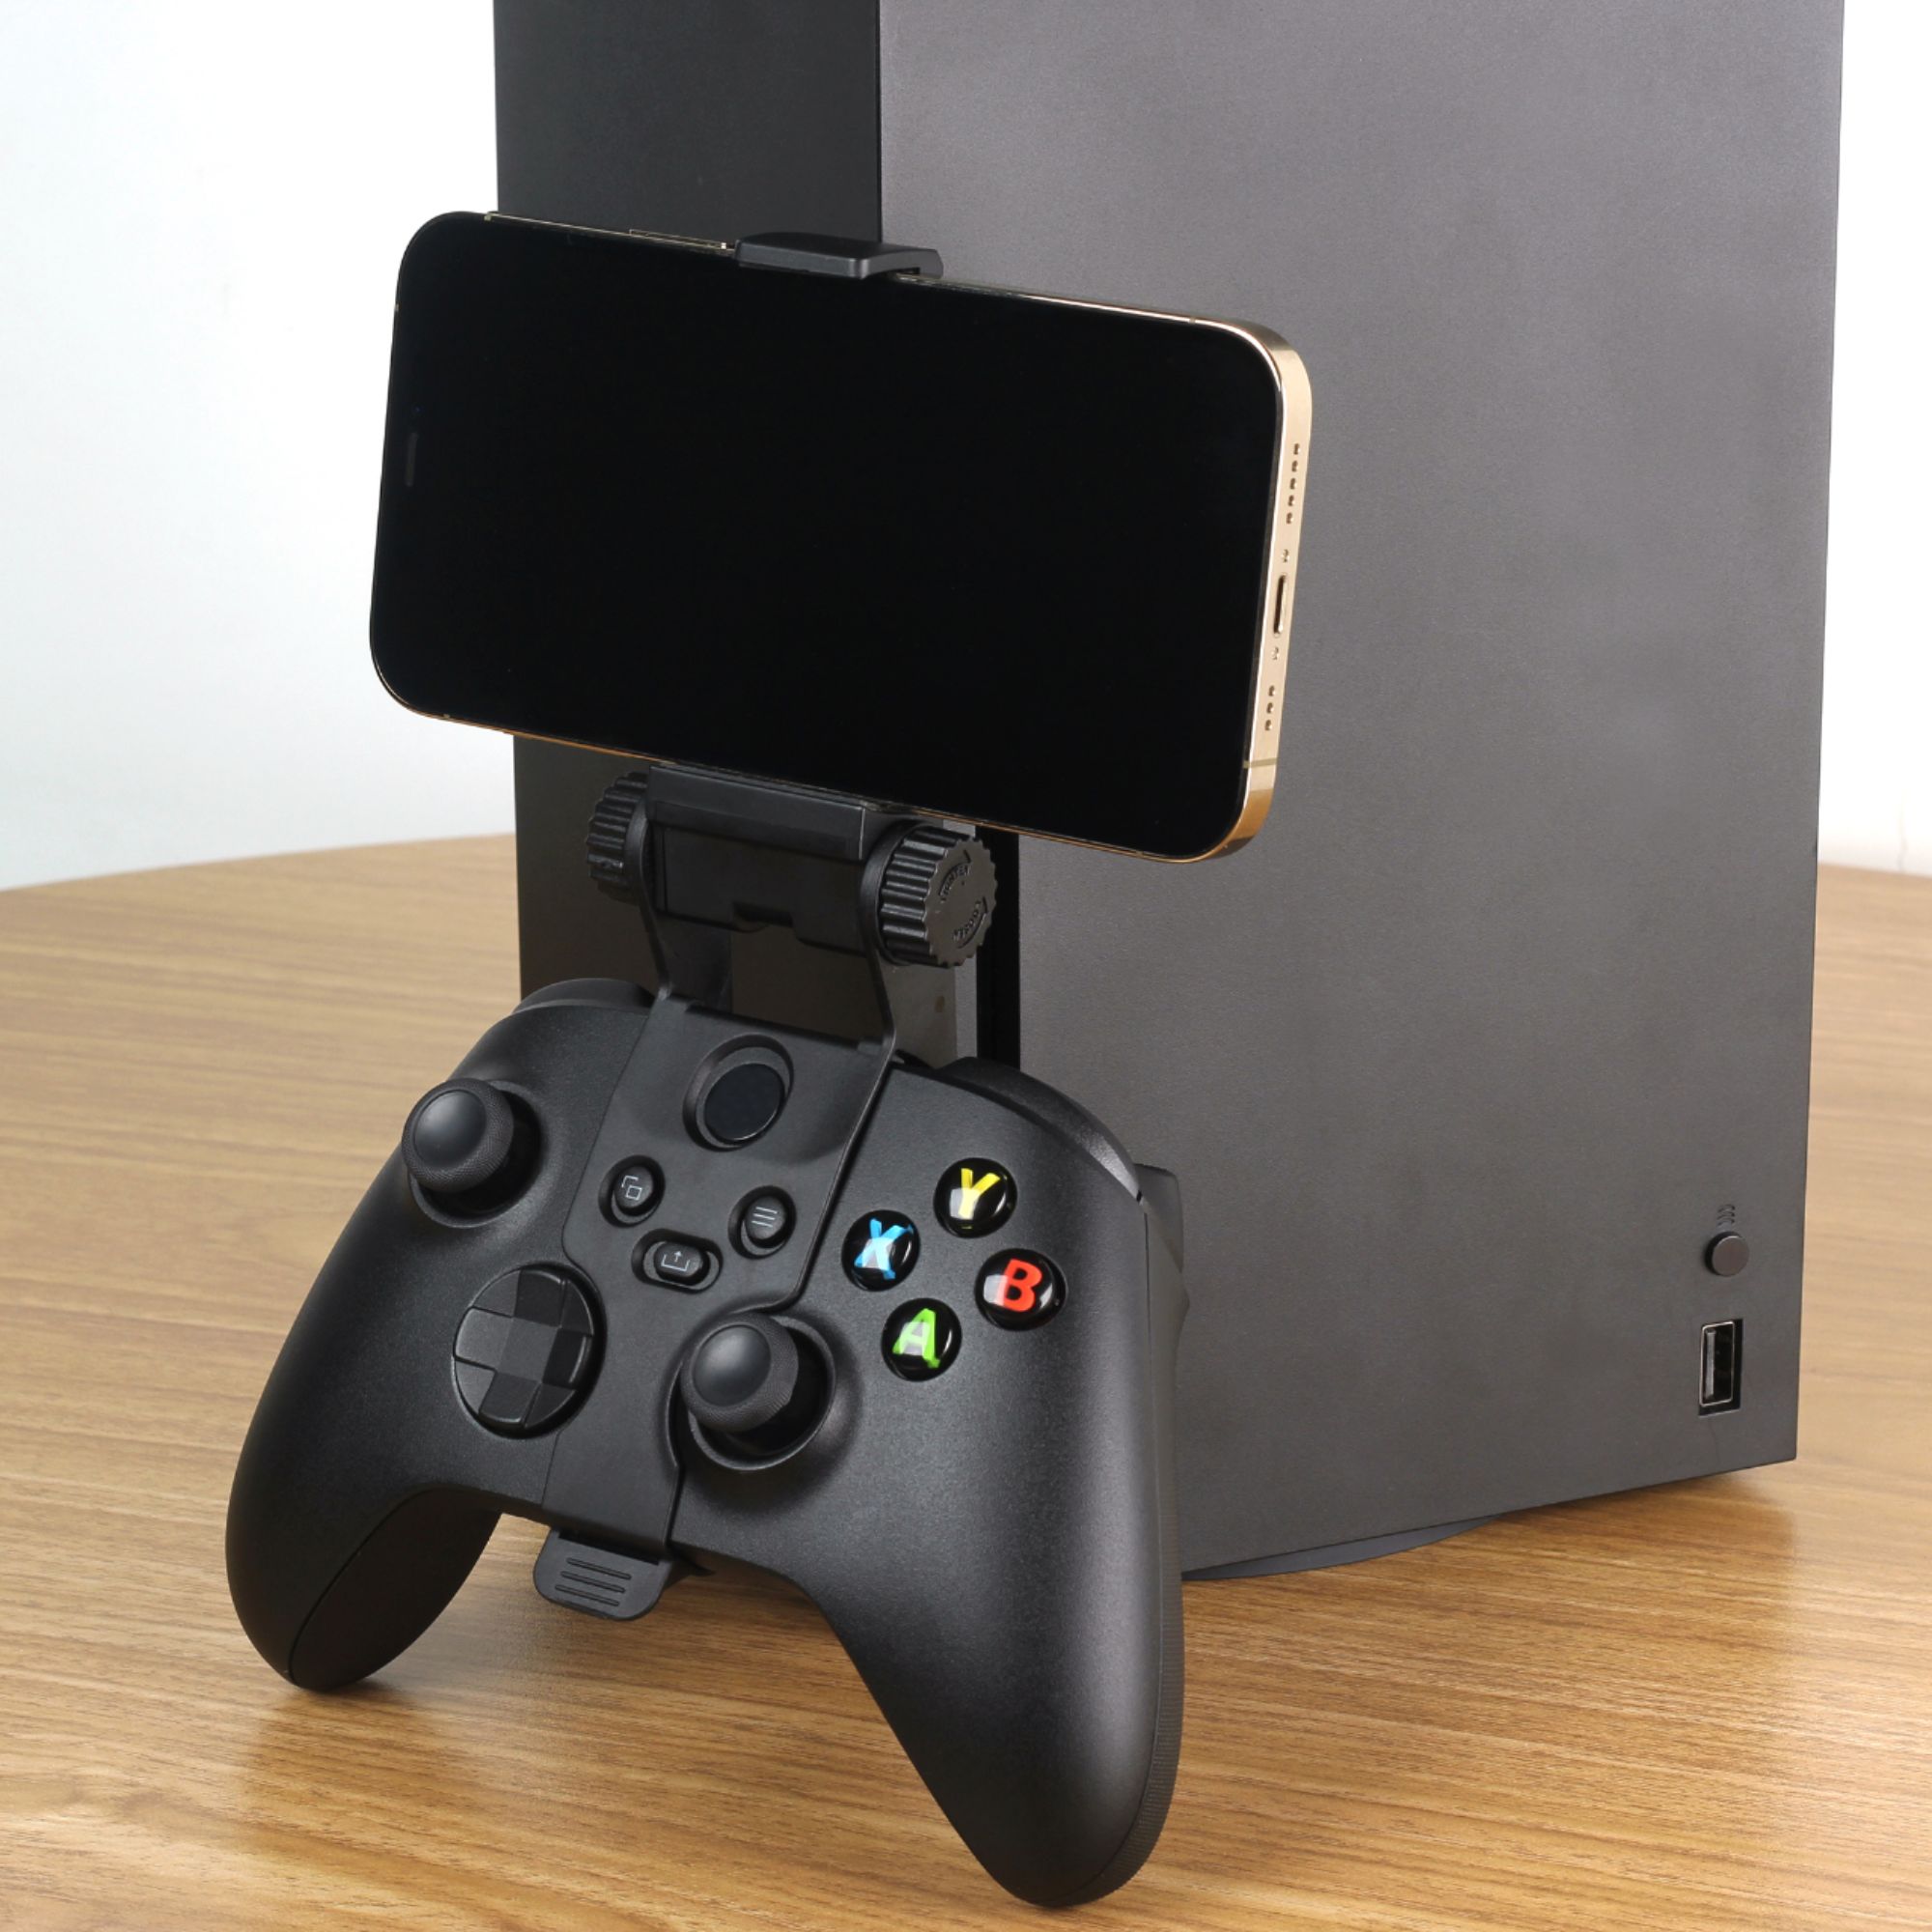 New mount charges iPhone while it's clipped to Xbox game controller